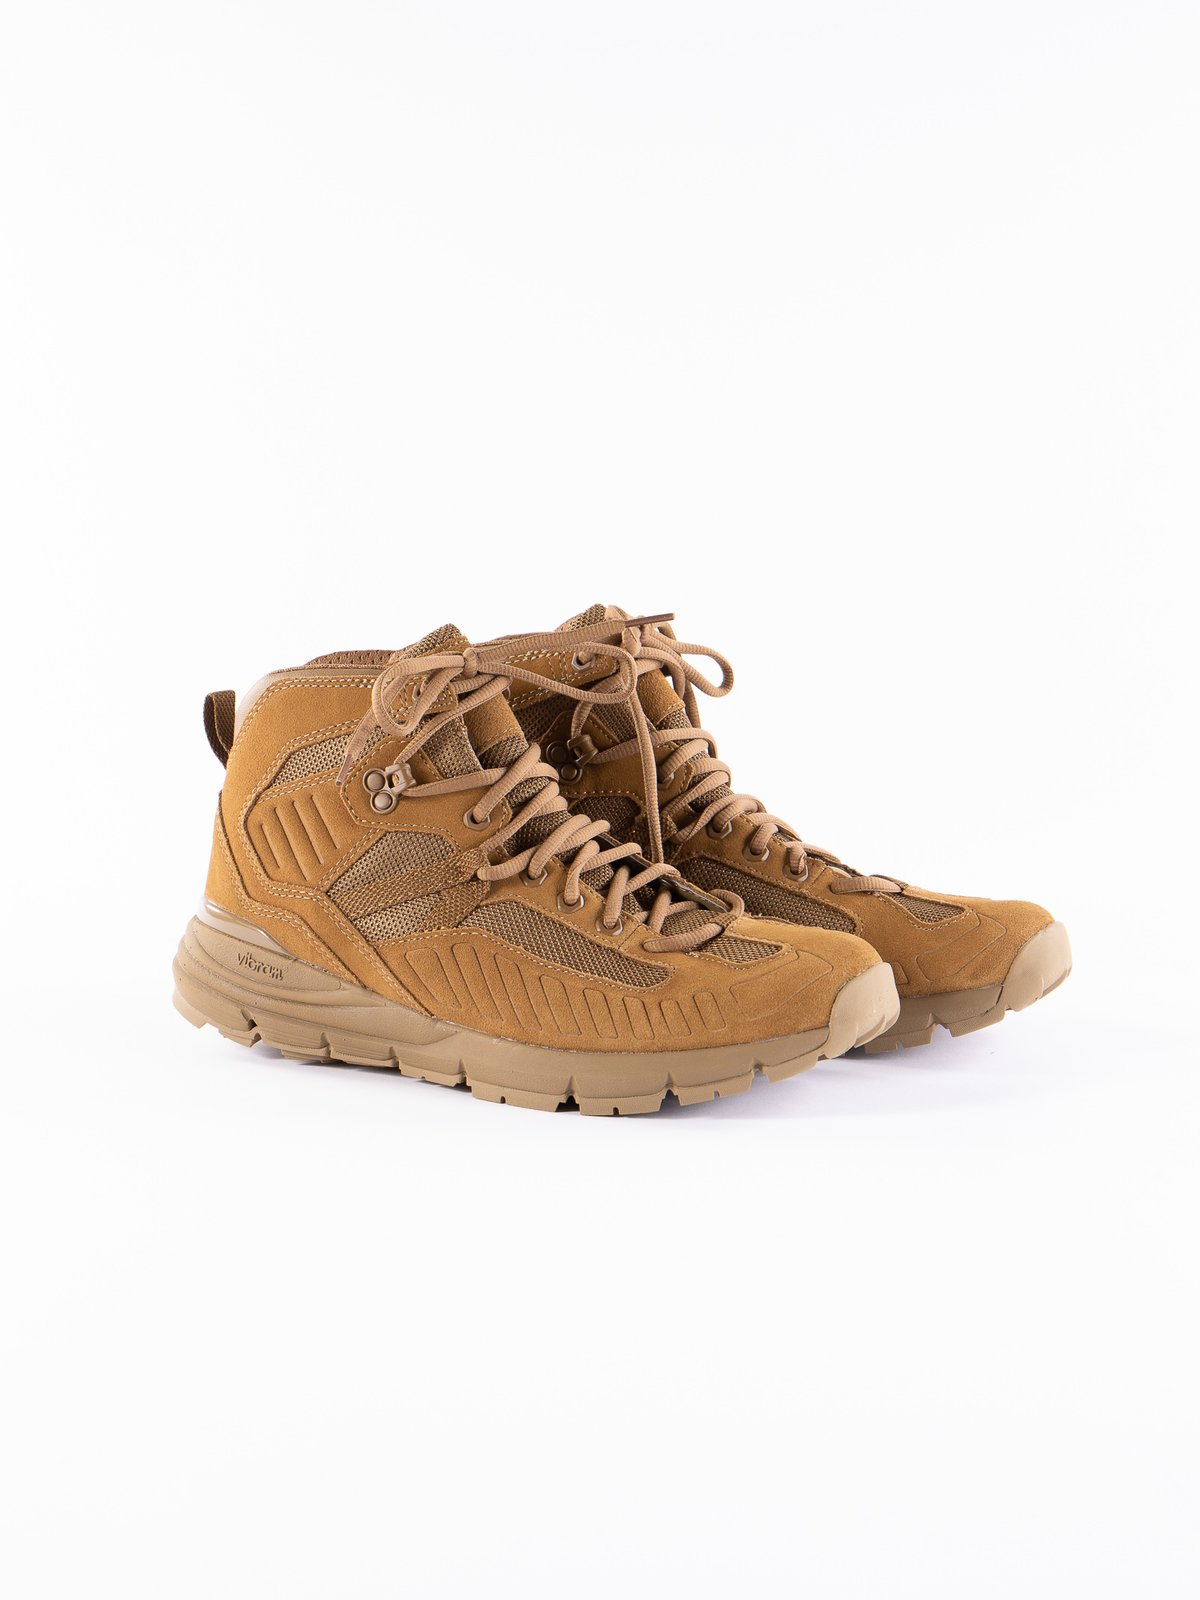 Coyote Hot Full Bore by Danner – The 